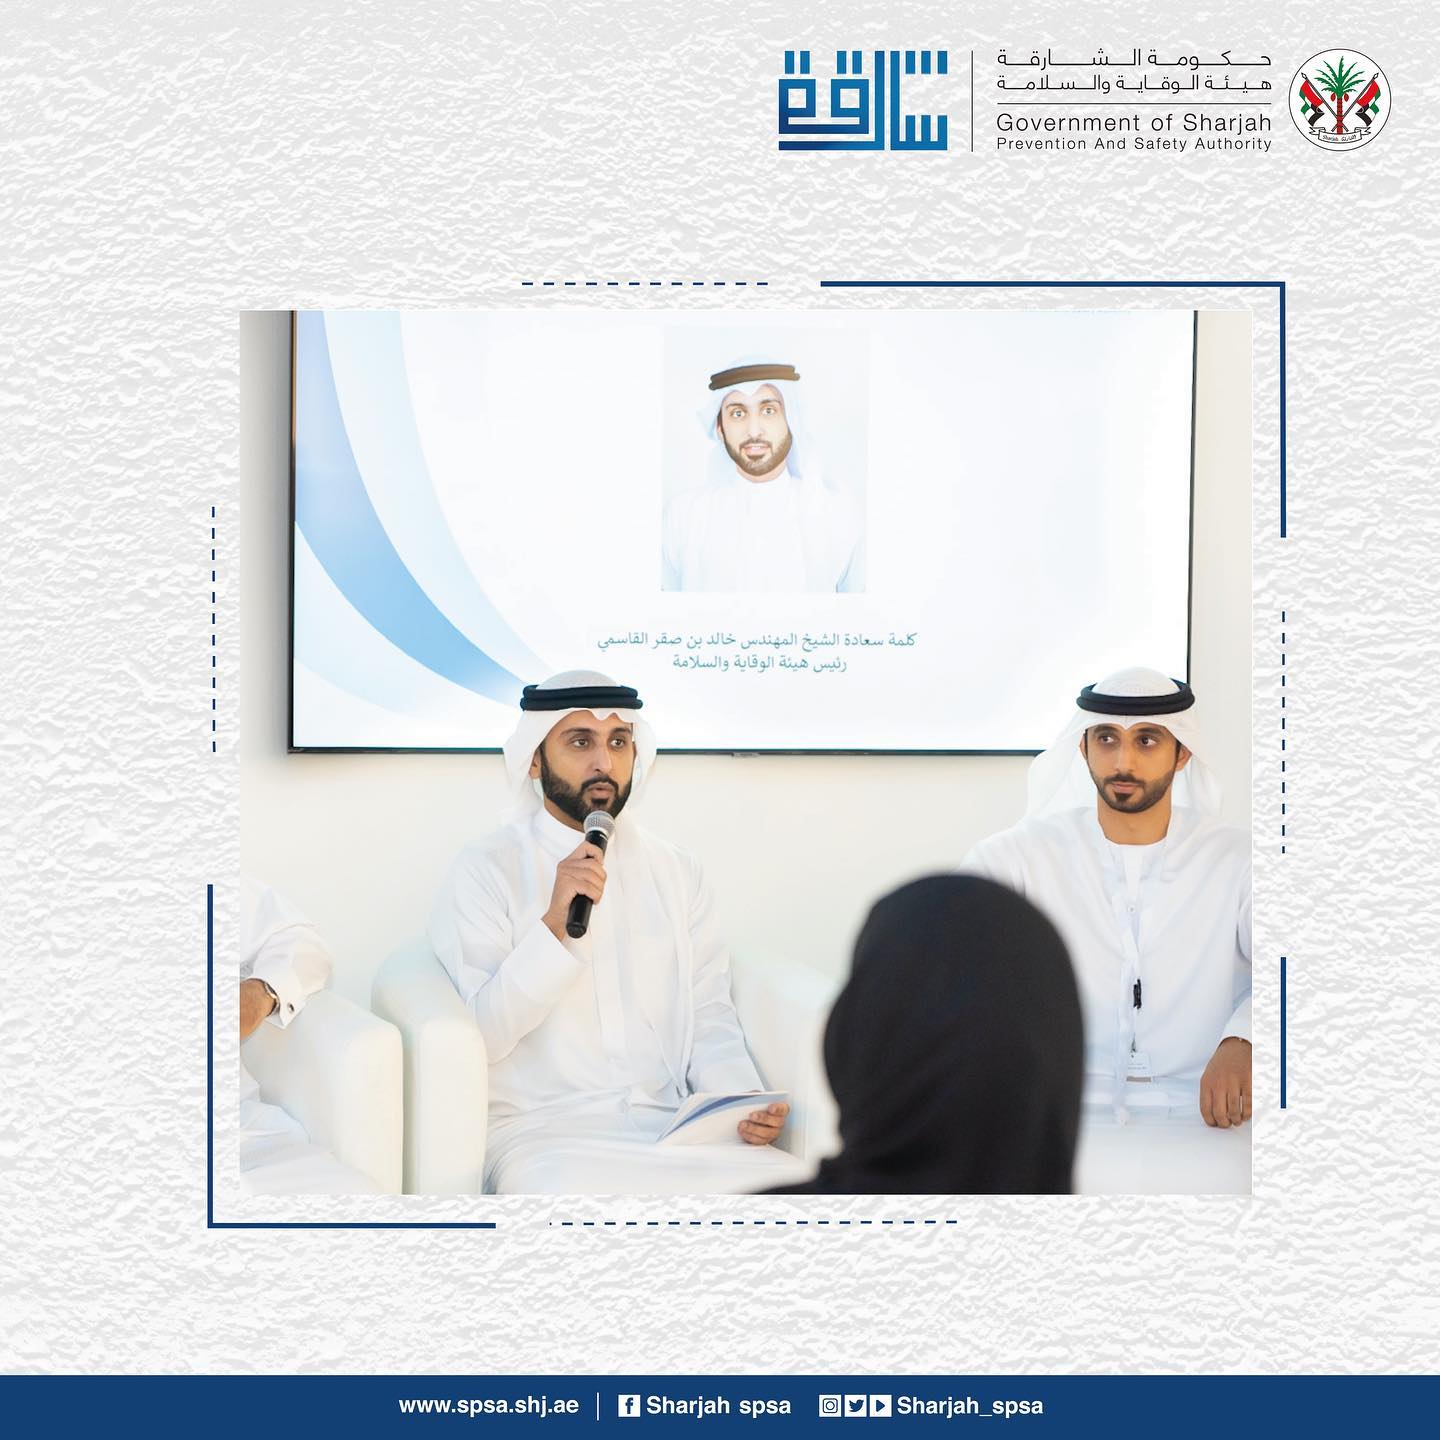 Launching the Sharjah Occupational Safety System